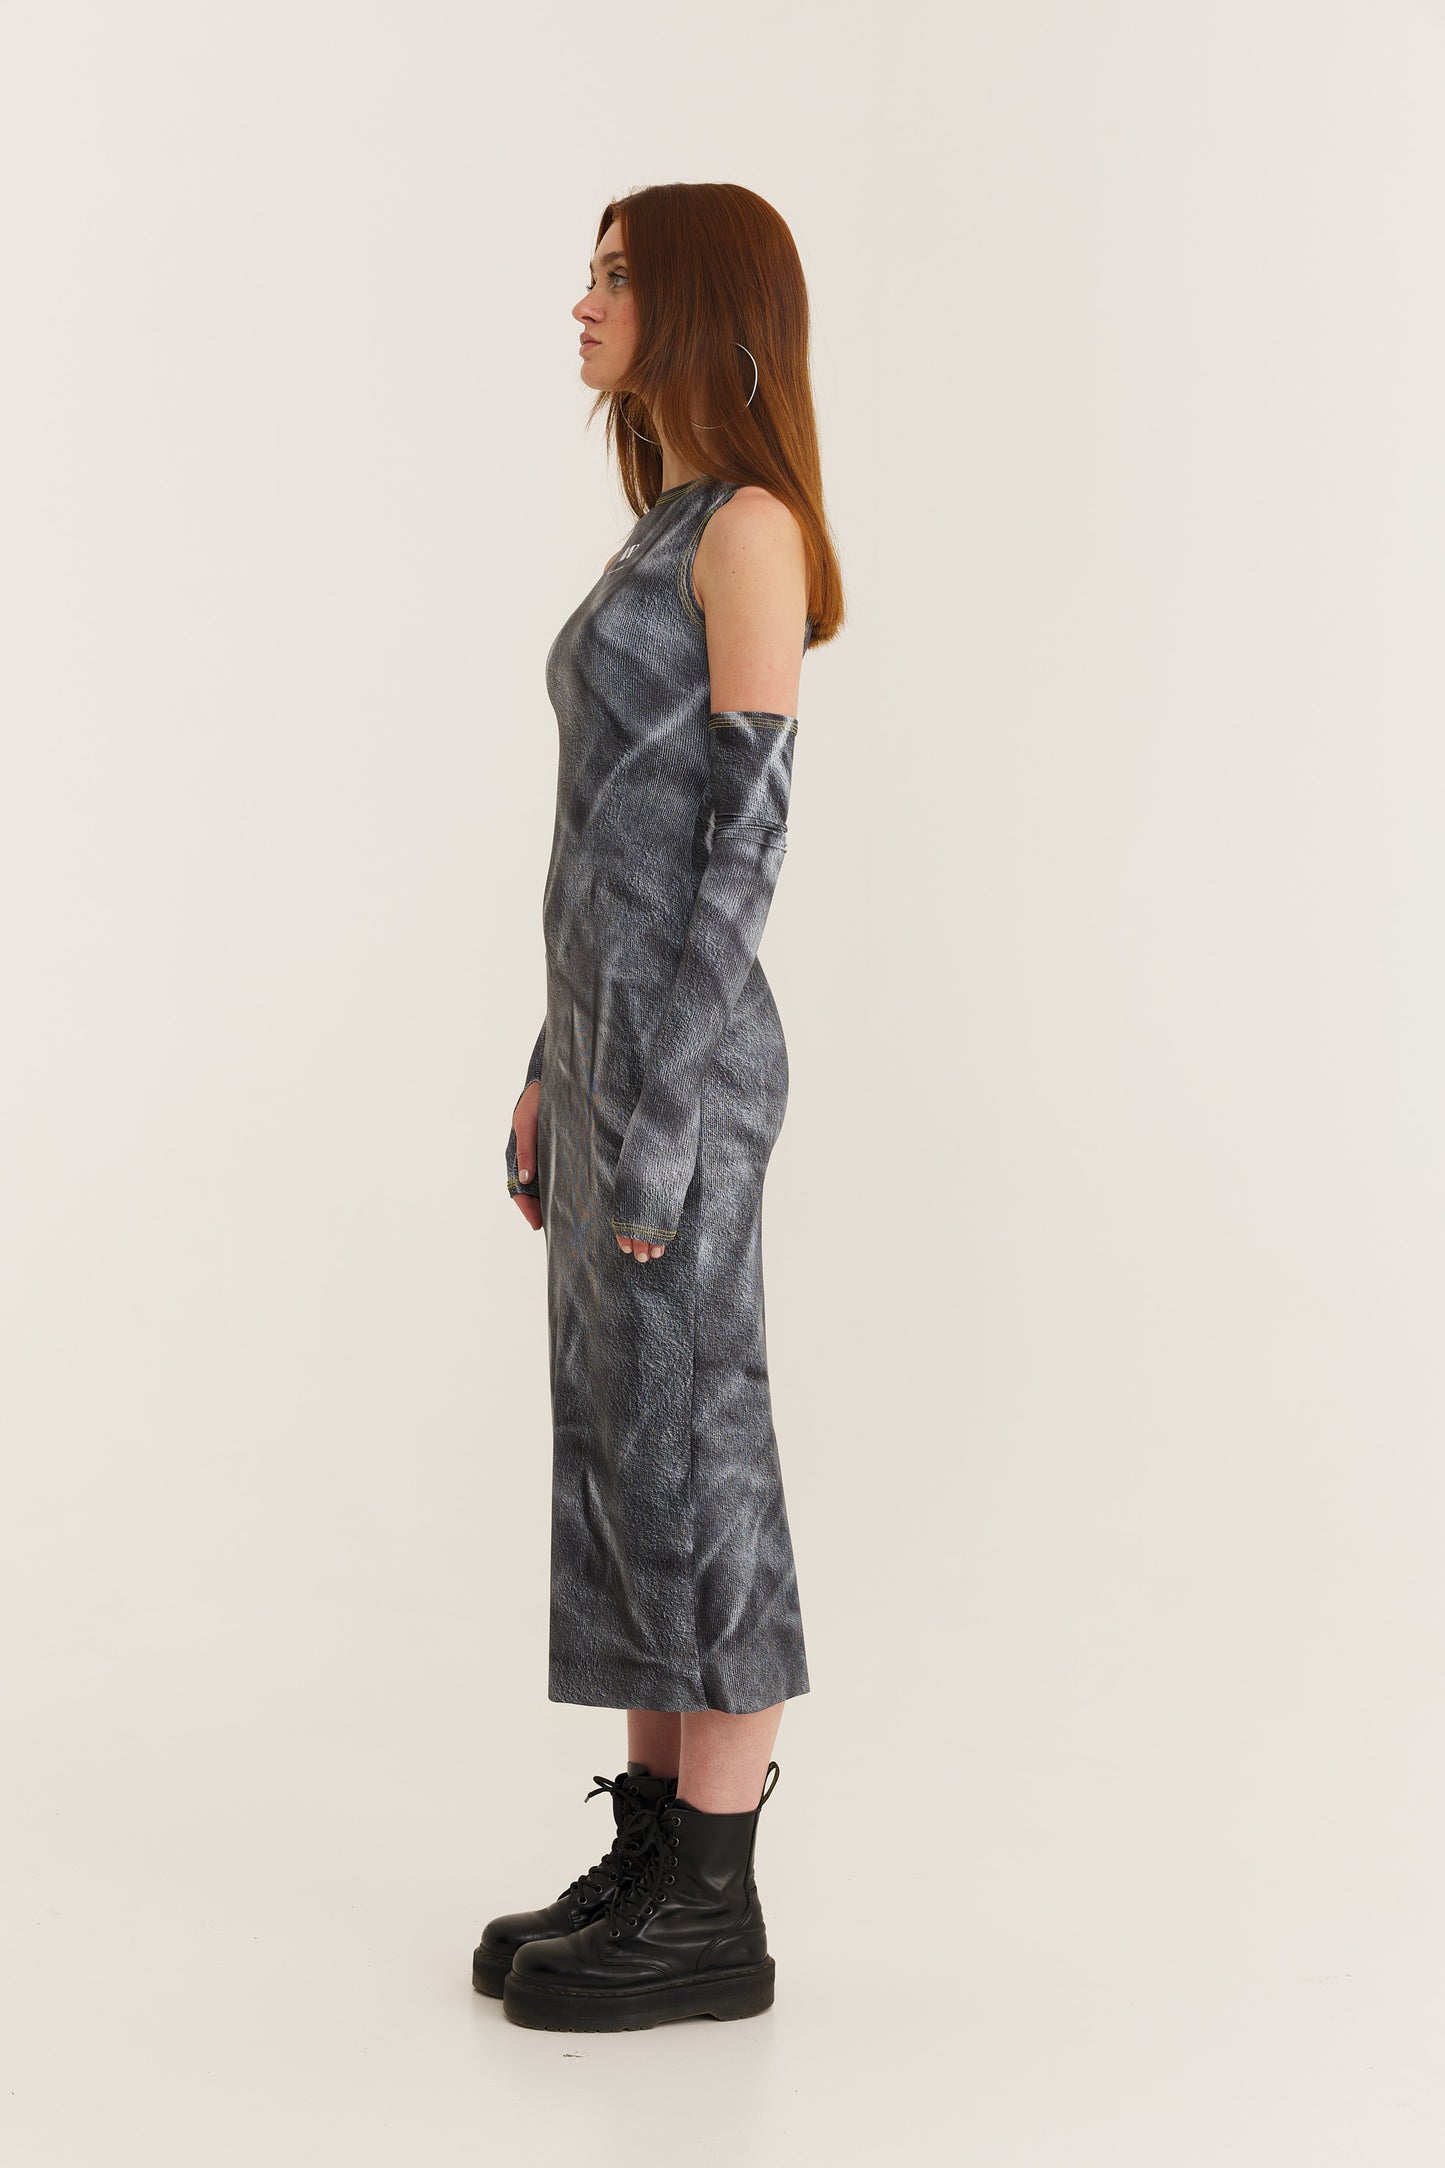 Wrinkled Second-Skin Dress with Gloves